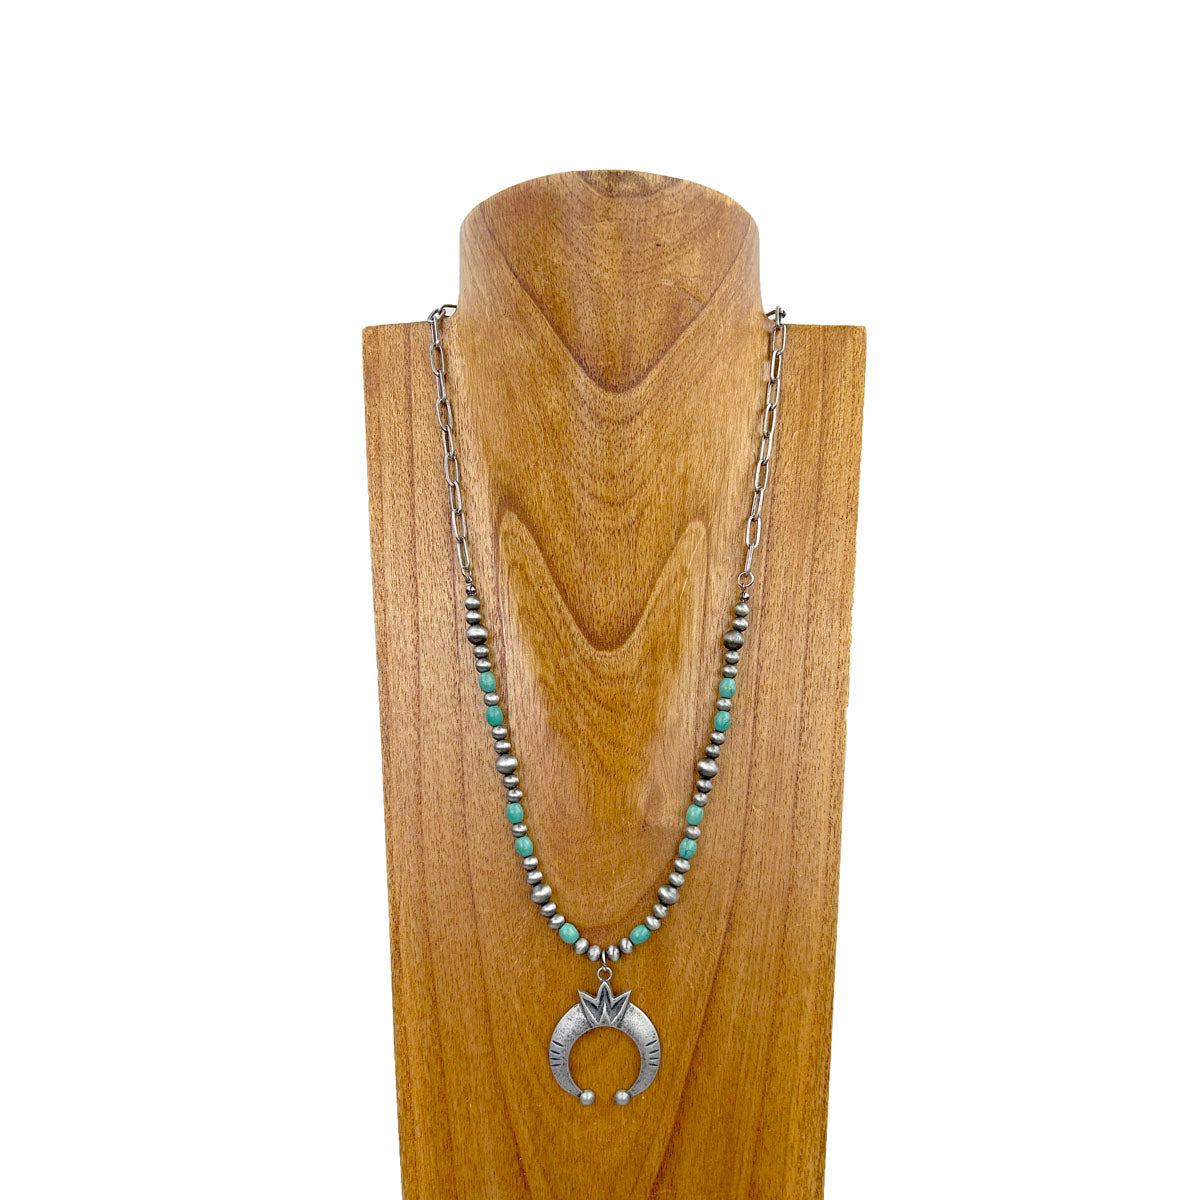 NKY231115-03-BLUE   30 inches silver metal chain and blue turquoise stone with silver squash blossom pendent Necklace